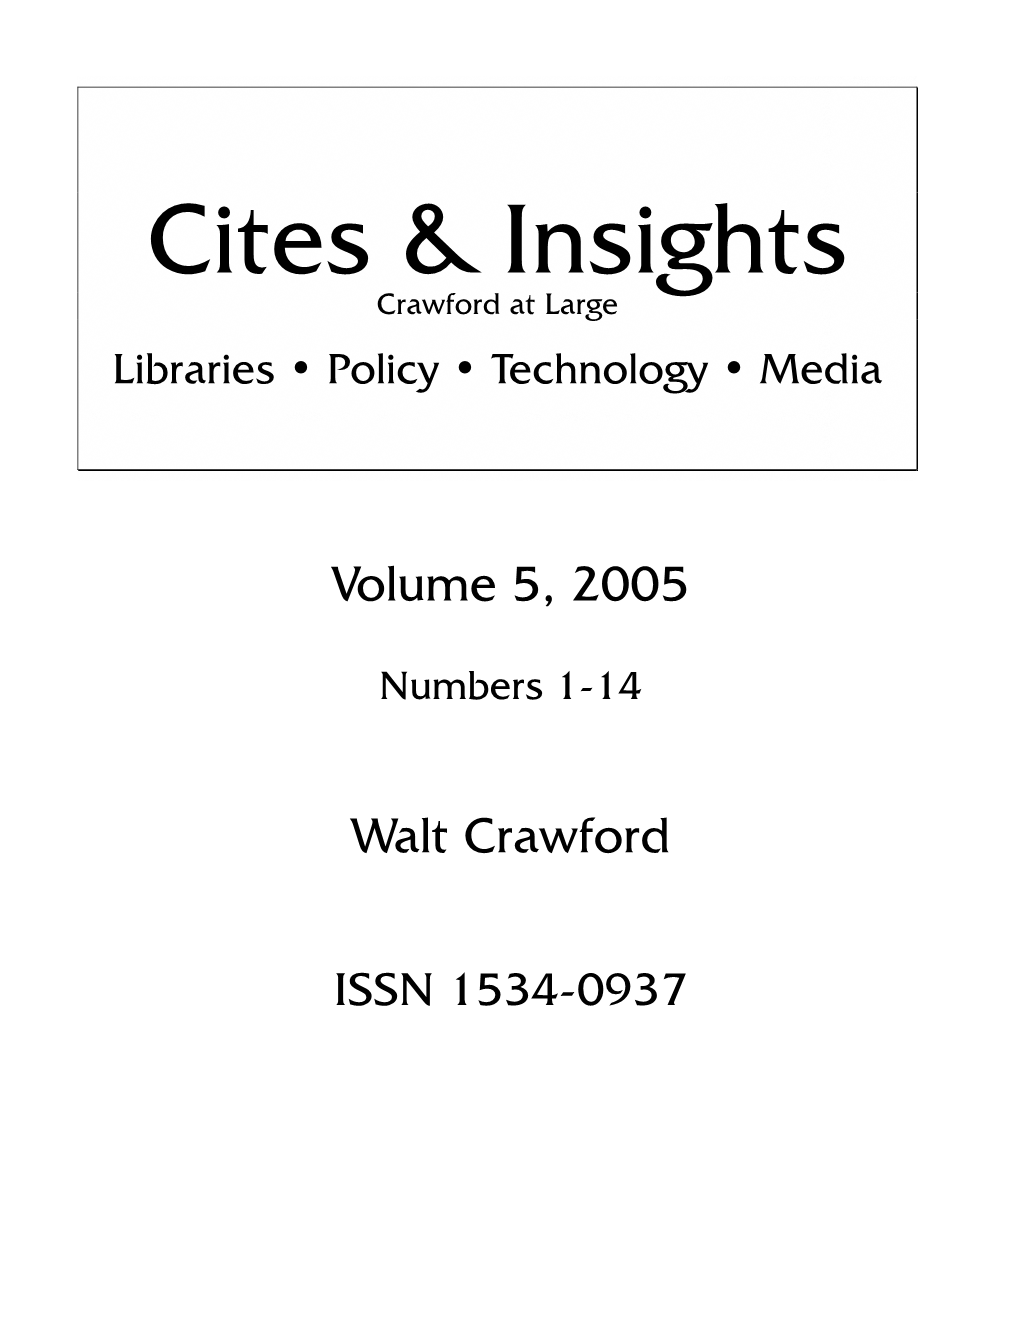 Libraries • Policy • Technology • Media